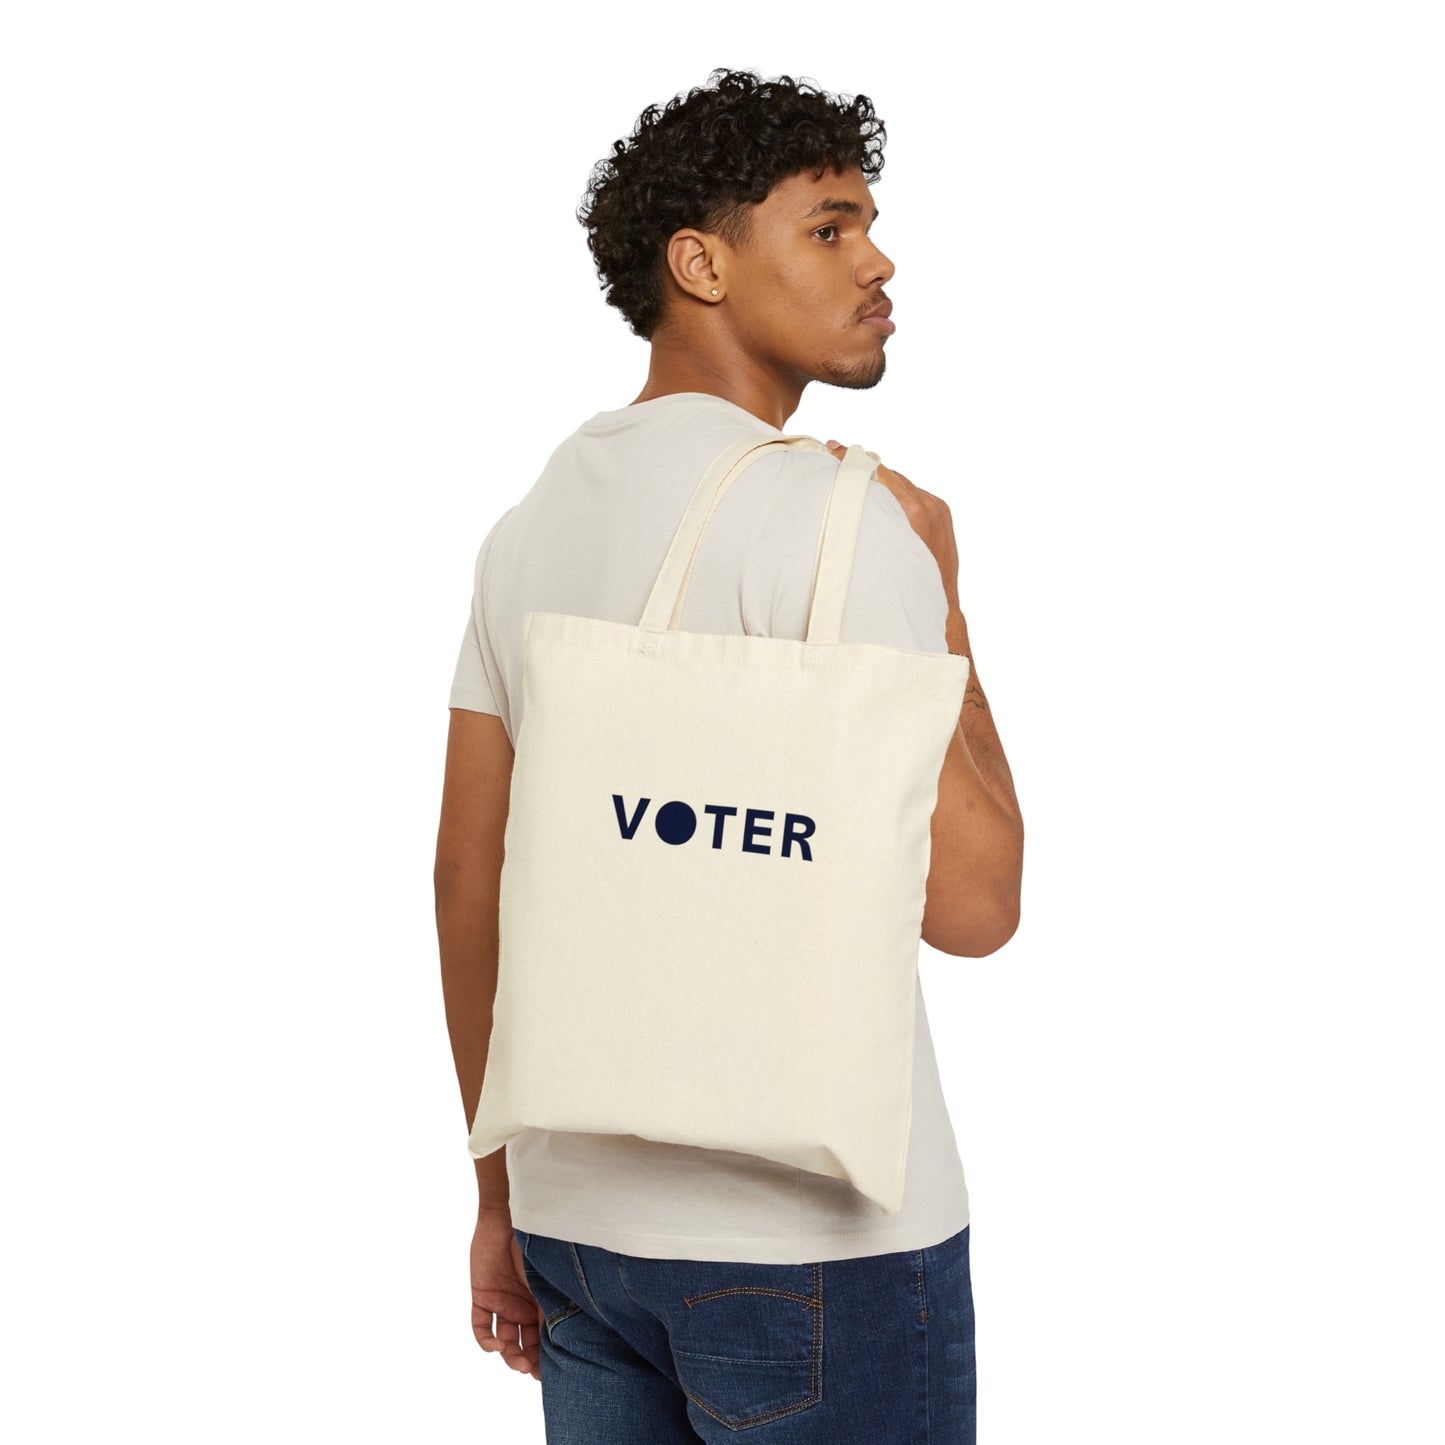 Voter - Canvas Tote Bag